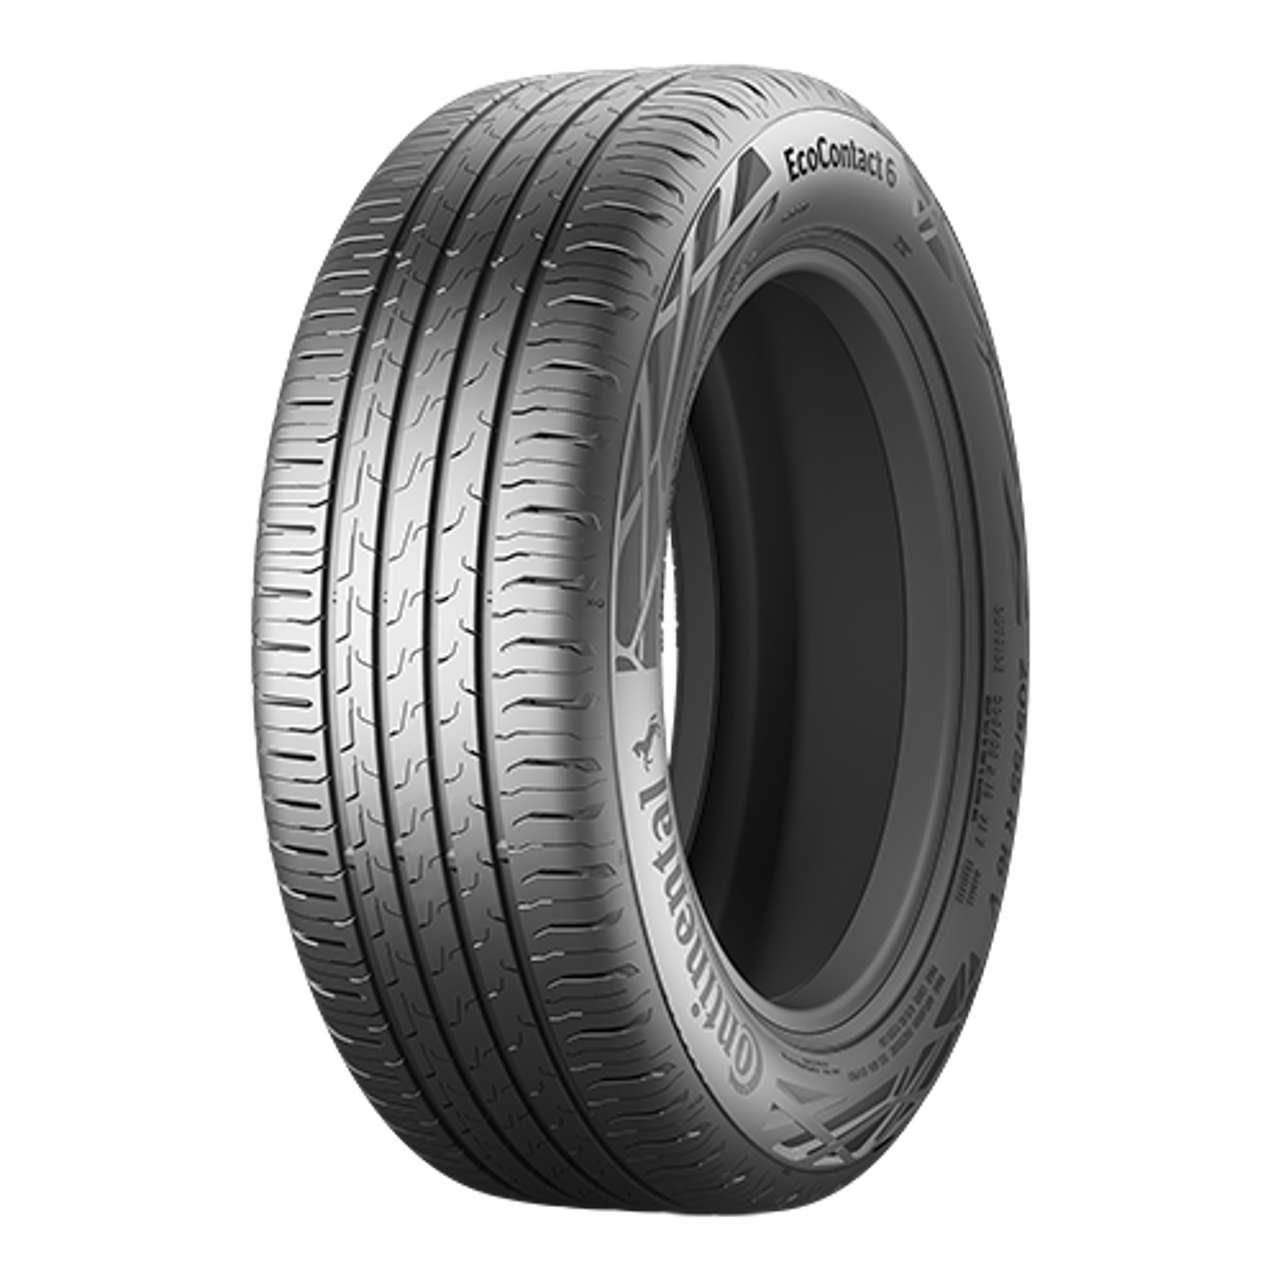 CONTINENTAL ECOCONTACT 6Q (MO) (EVc) 235/60R18 103W BSW